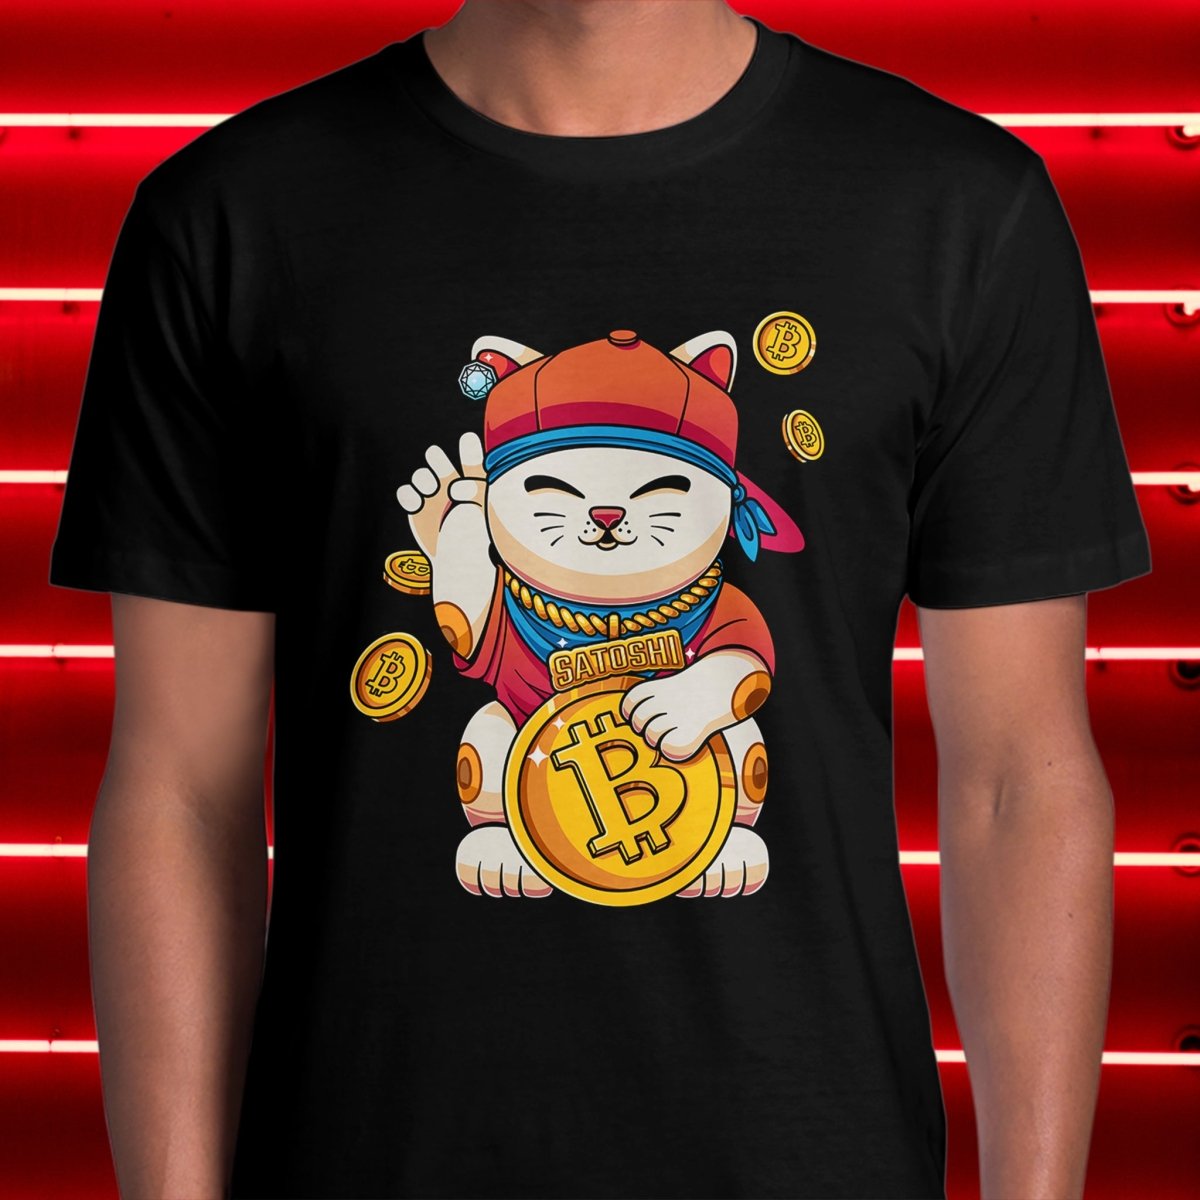 Bitcoin Apparel - Satoshi Lucky Cat T-Shirt worn by model (front view).